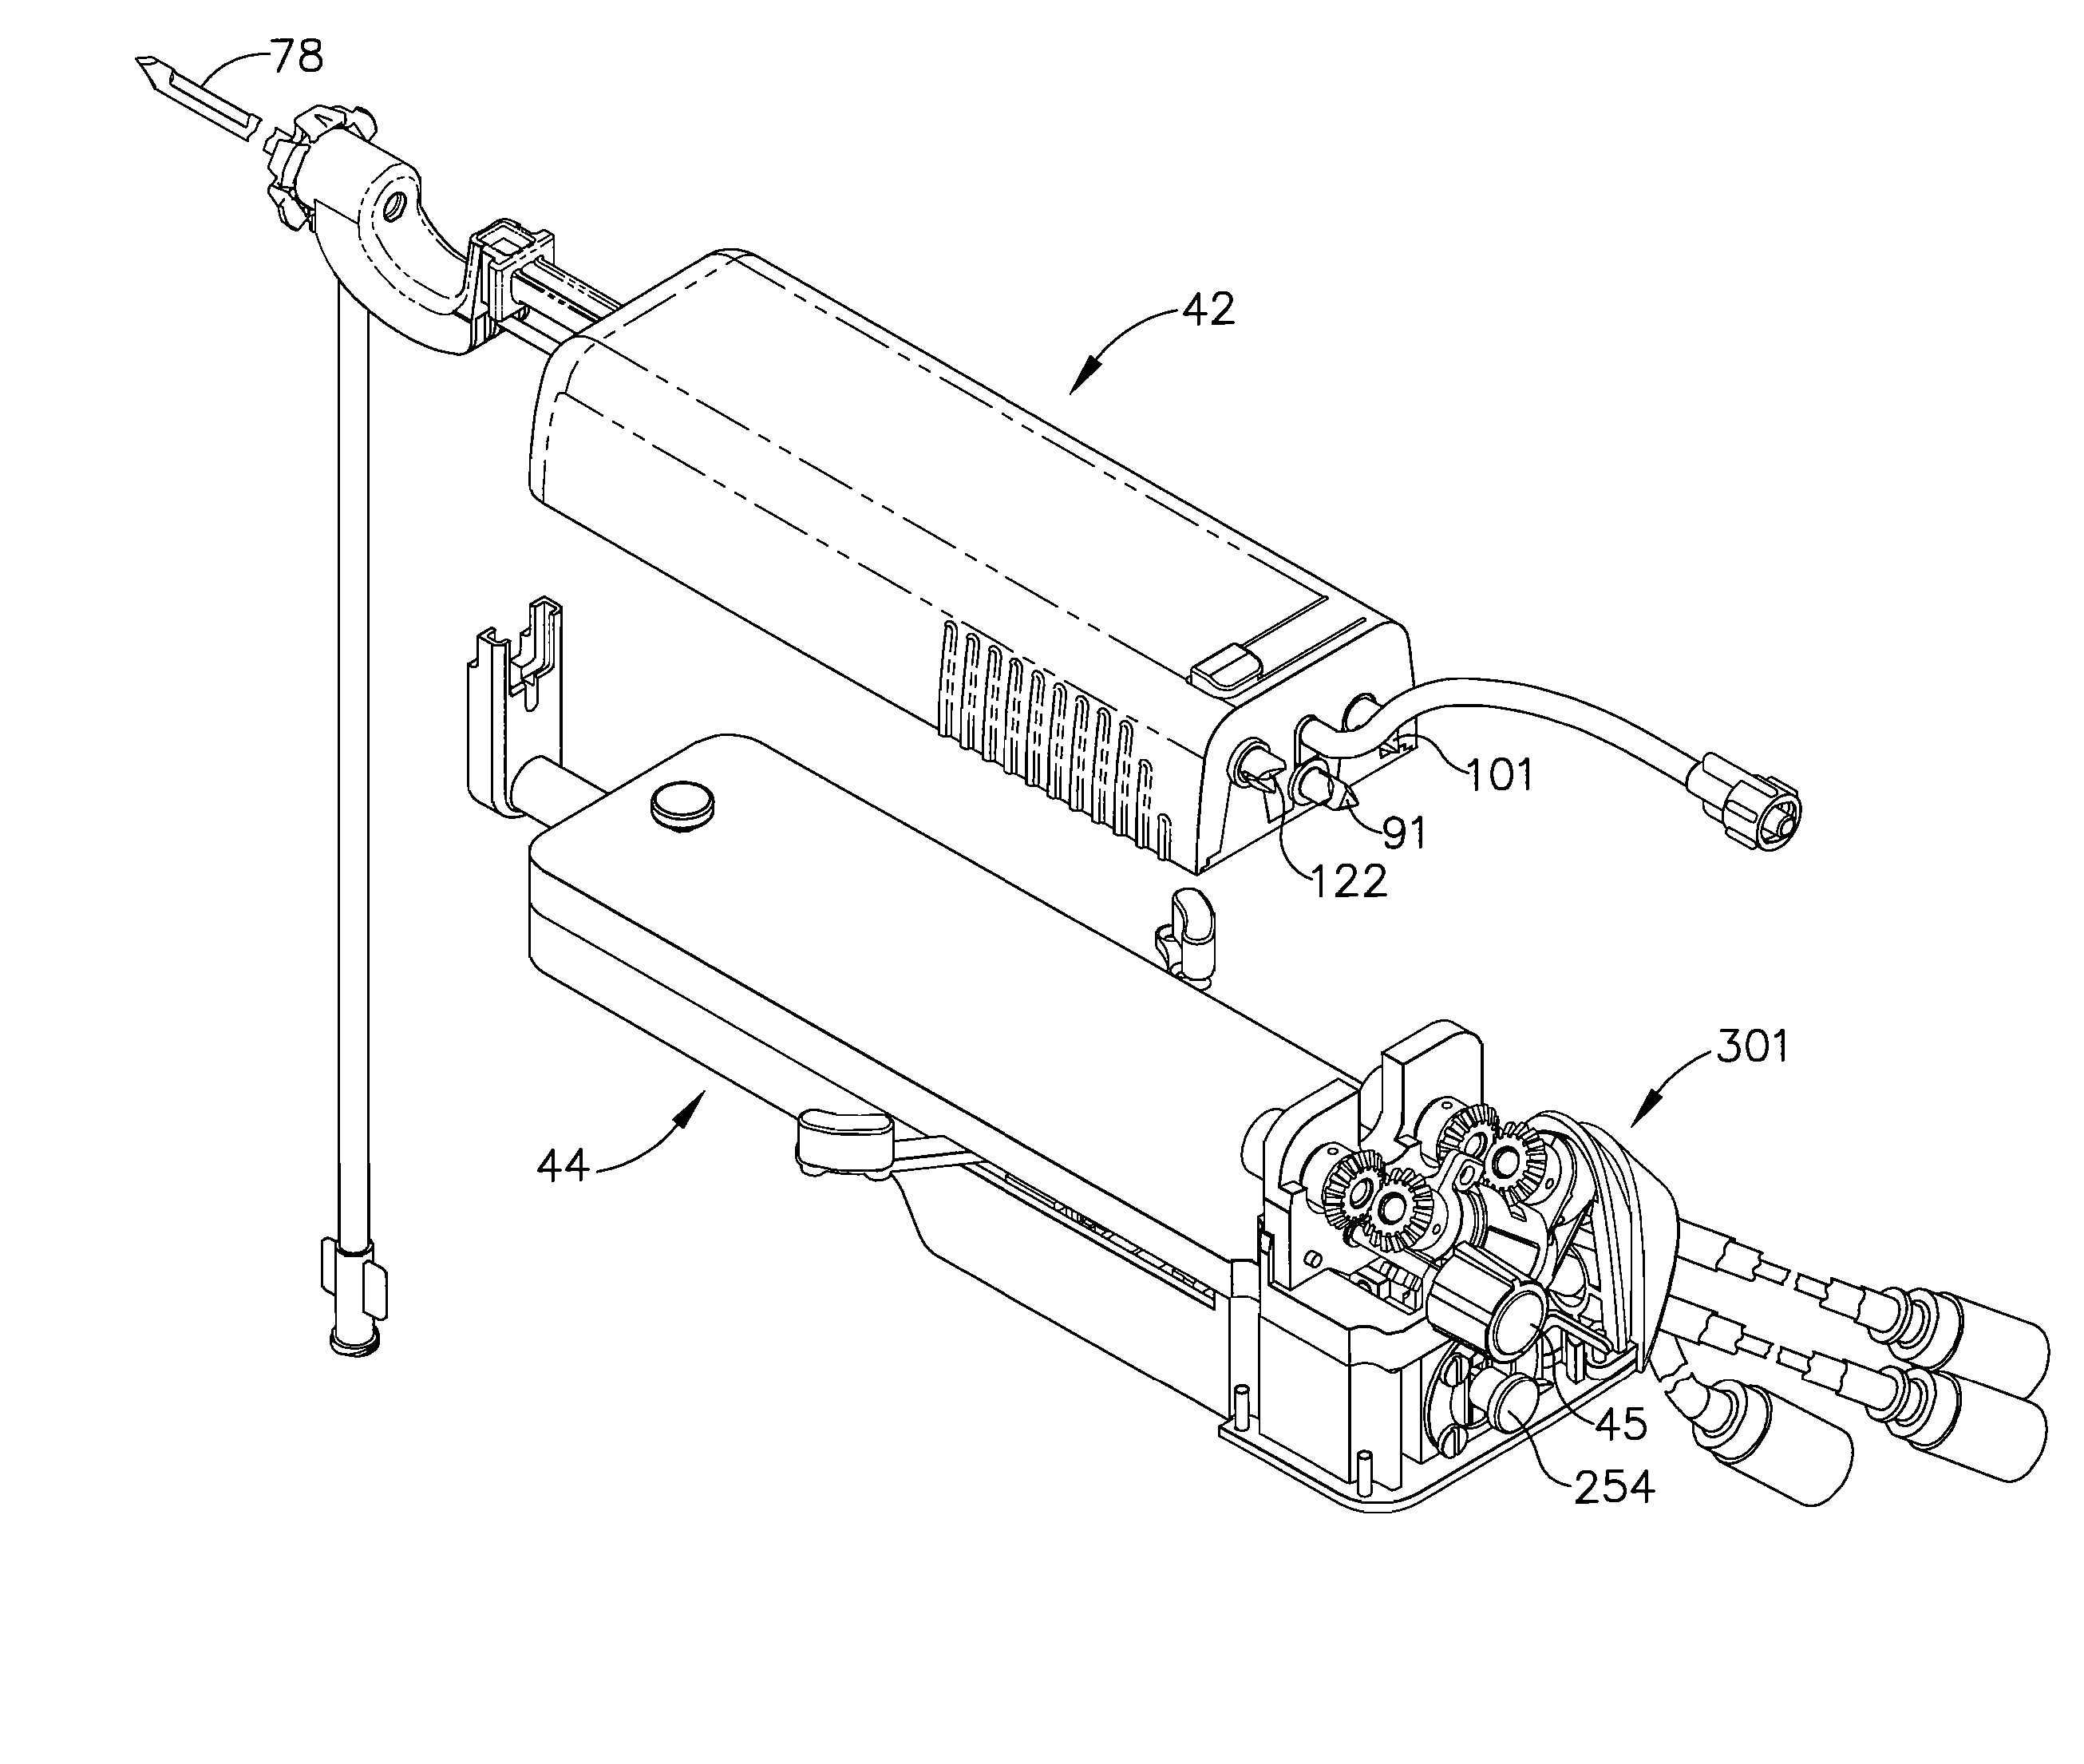 Remote thumbwheel for a surgical biopsy device